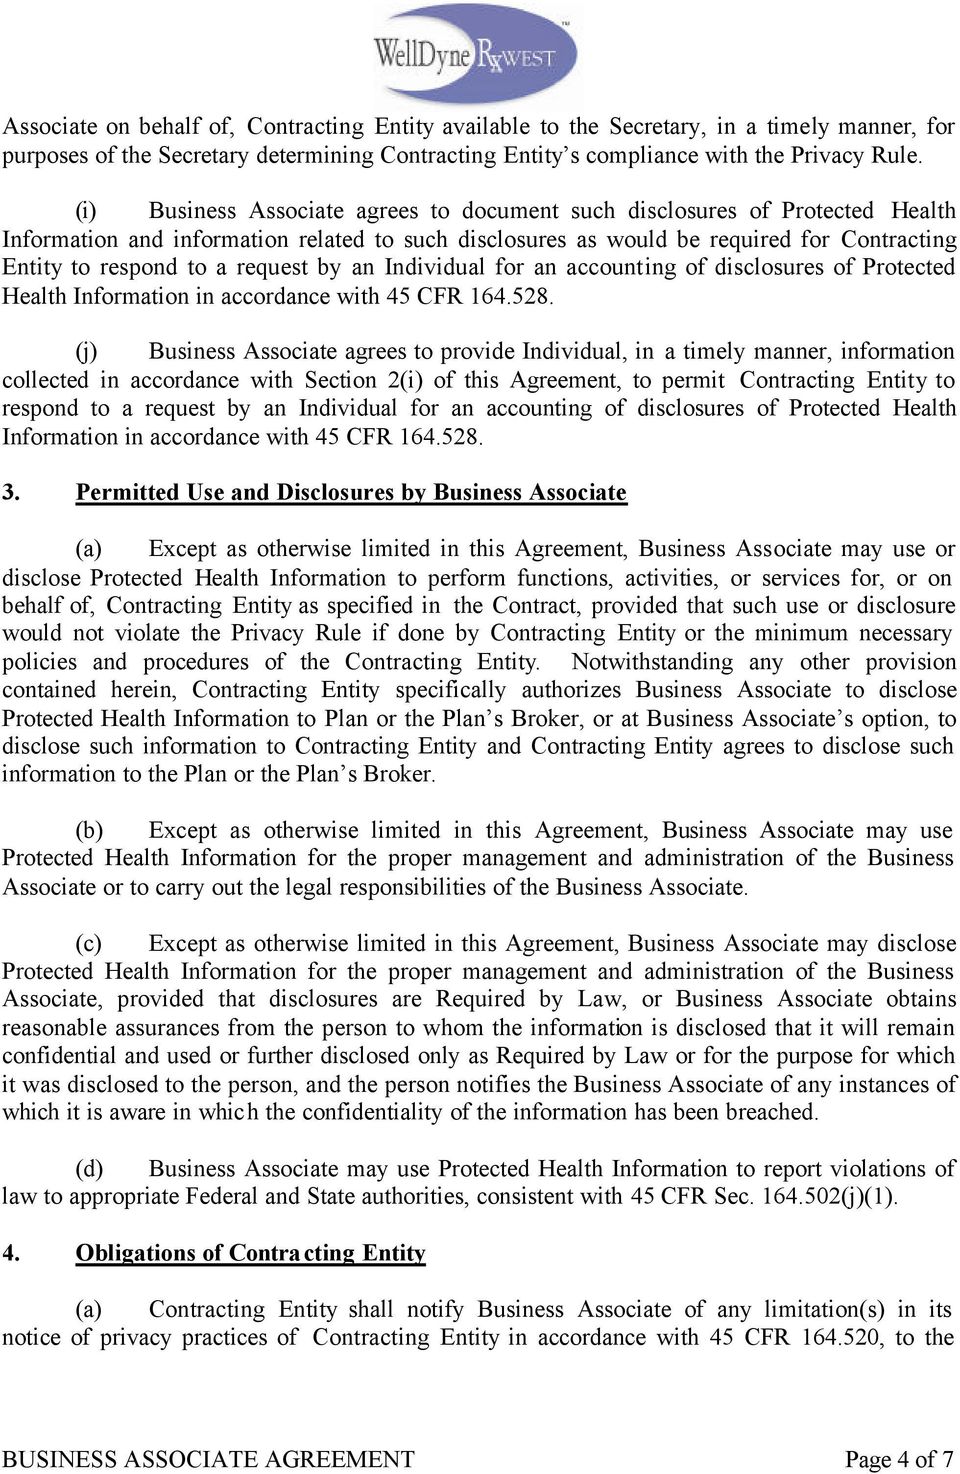 request by an Individual for an accounting of disclosures of Protected Health Information in accordance with 45 CFR 164.528.